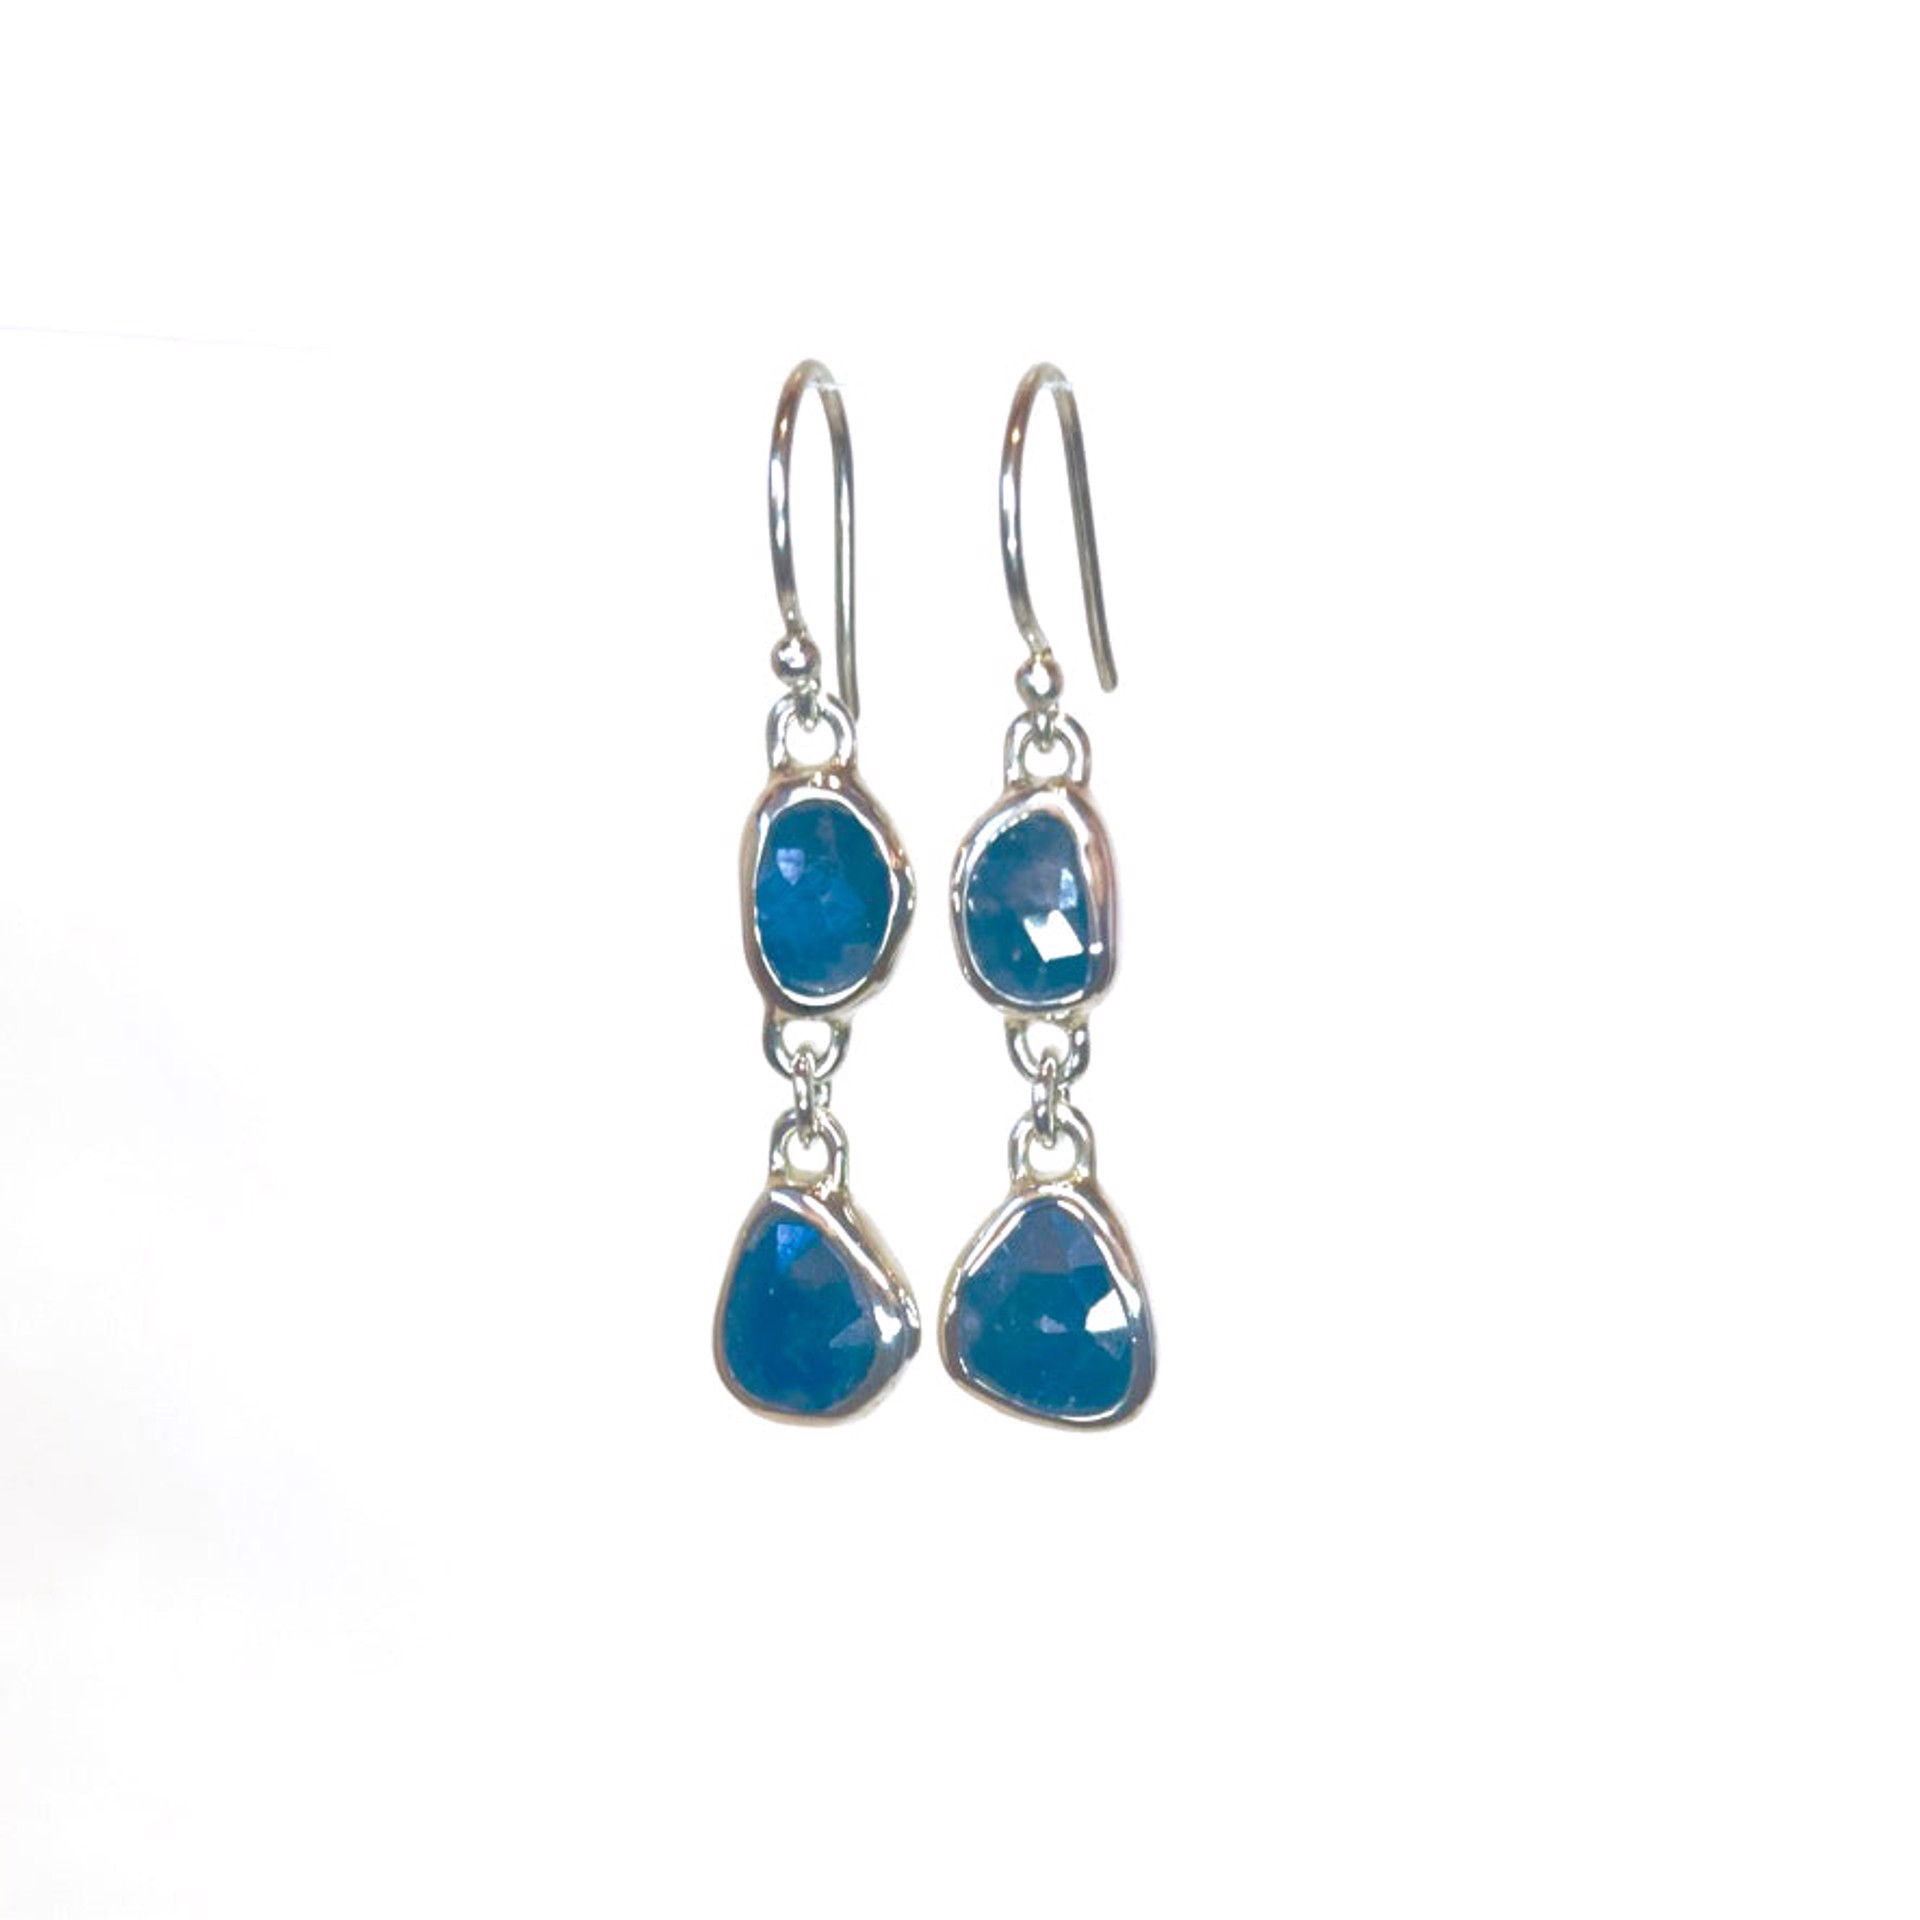 Double Drop Blue Sapphire Earrings by Sara Thompson